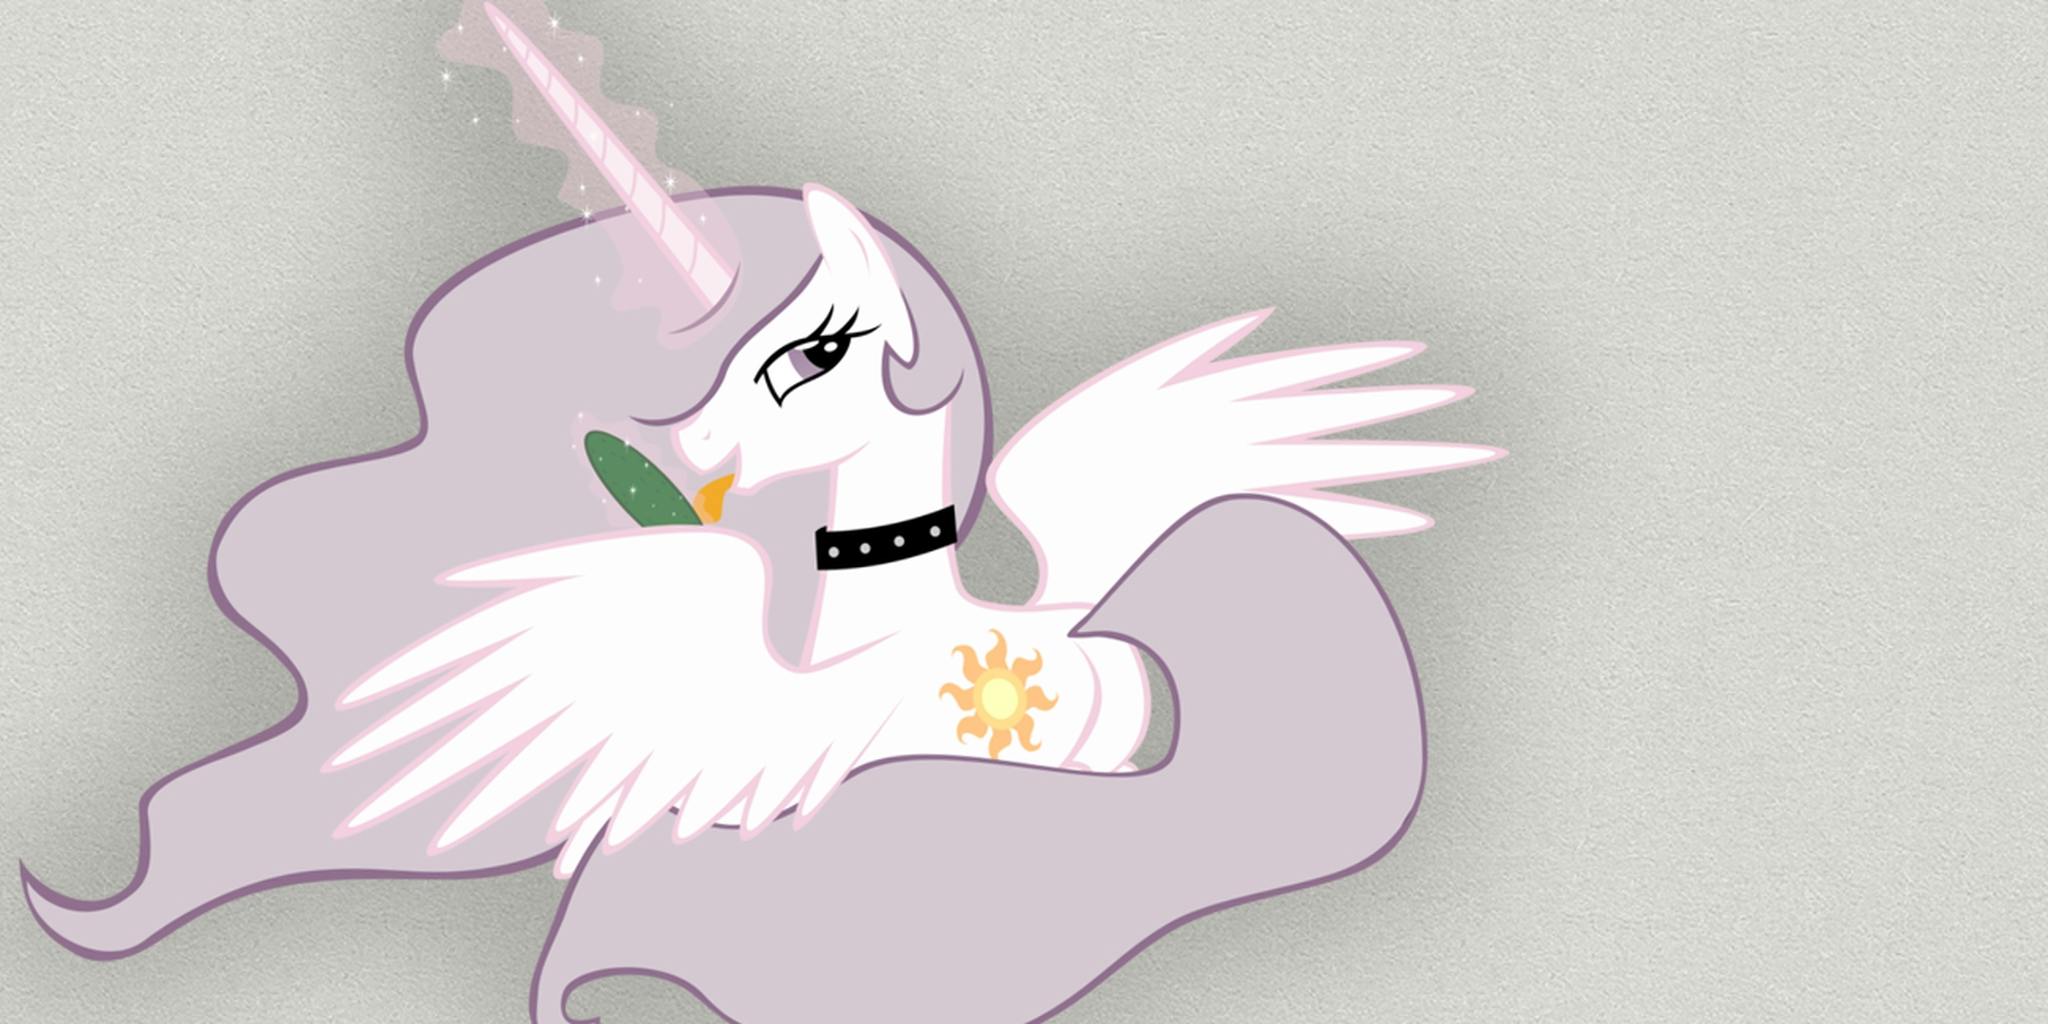 Bronies attack one of their own after a racy ‘My Little Pony’ blog disappears